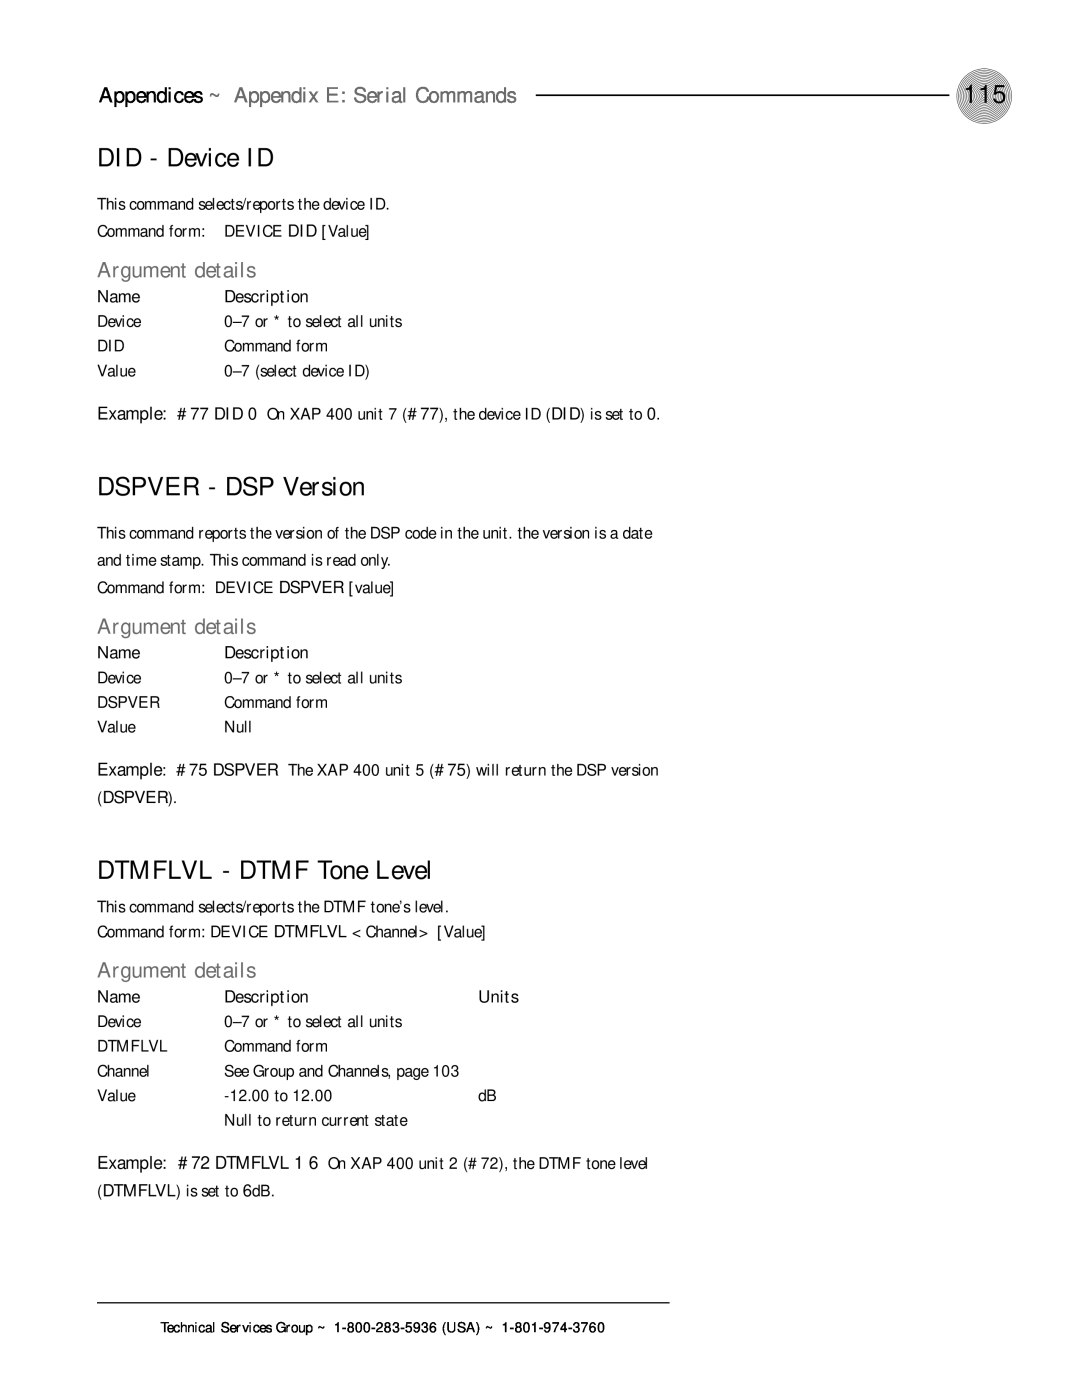 ClearOne comm XAP 400 DID - Device ID, DSPVER - DSP Version, DTMFLVL - DTMF Tone Level, Argument details, Name, Dspver 